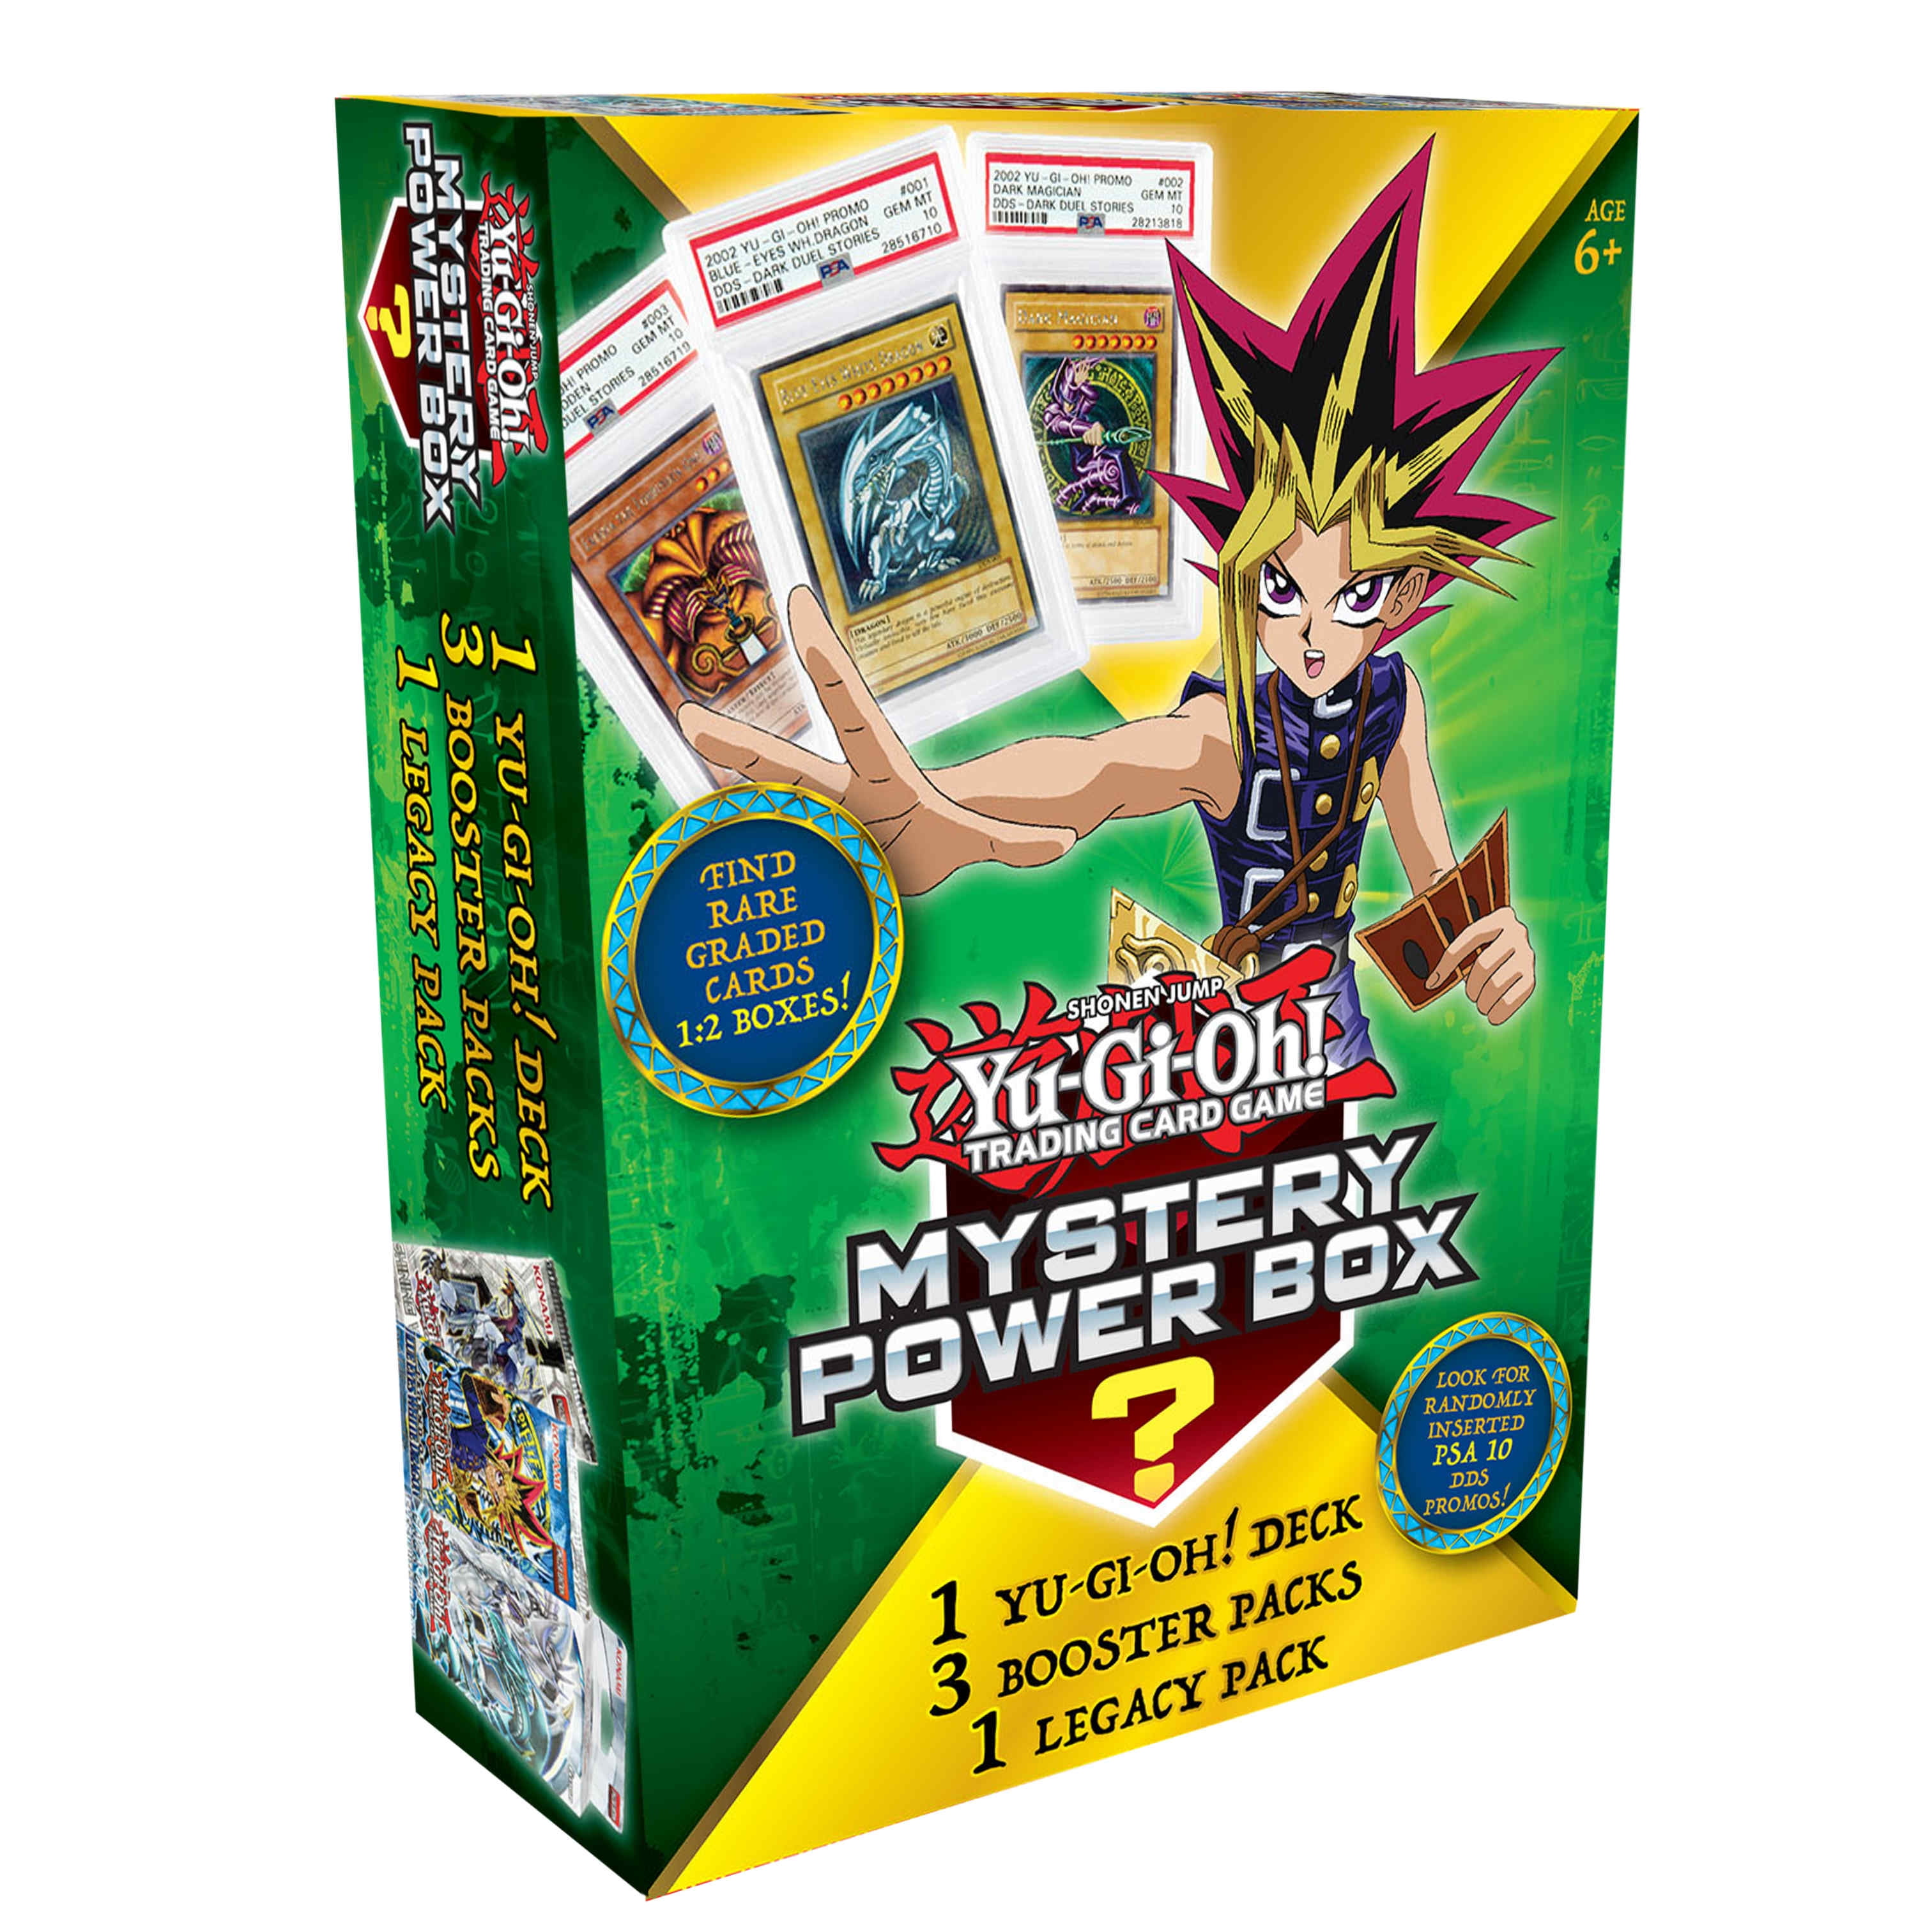 *1x OTS tournament Pack Guarantied* Yugioh Mystery Box Seald Booster Packs